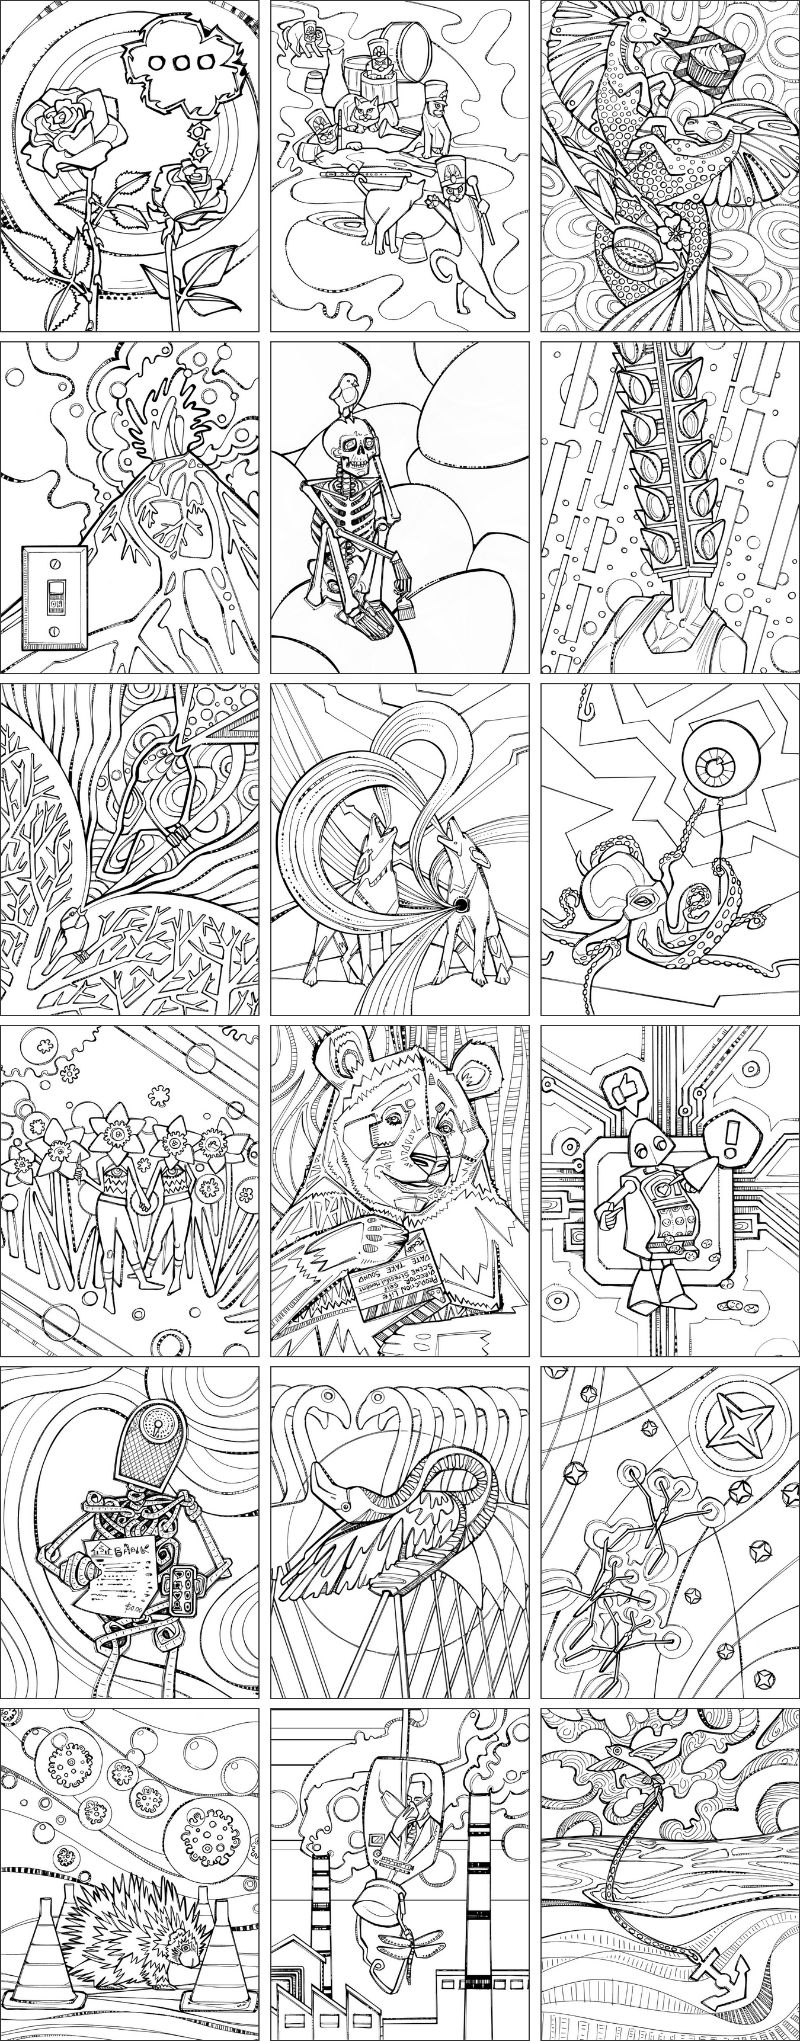 coloring book pages from Everything’s Fine, mental health workbook by Gwenn Seemel